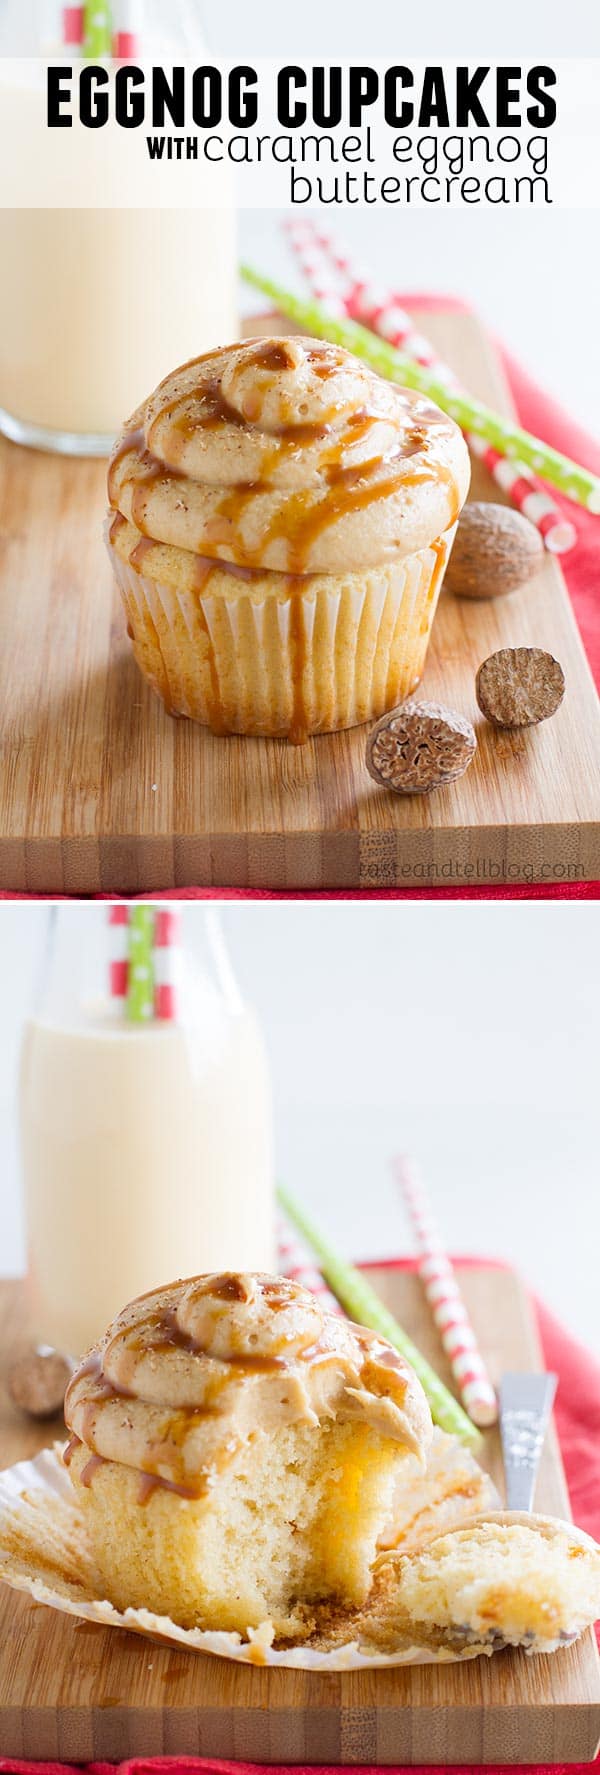 Moist and flavorful eggnog cupcakes are topped with a caramel eggnog buttercream in these festive and seasonal Eggnog Cupcakes with Caramel Eggnog Buttercream.